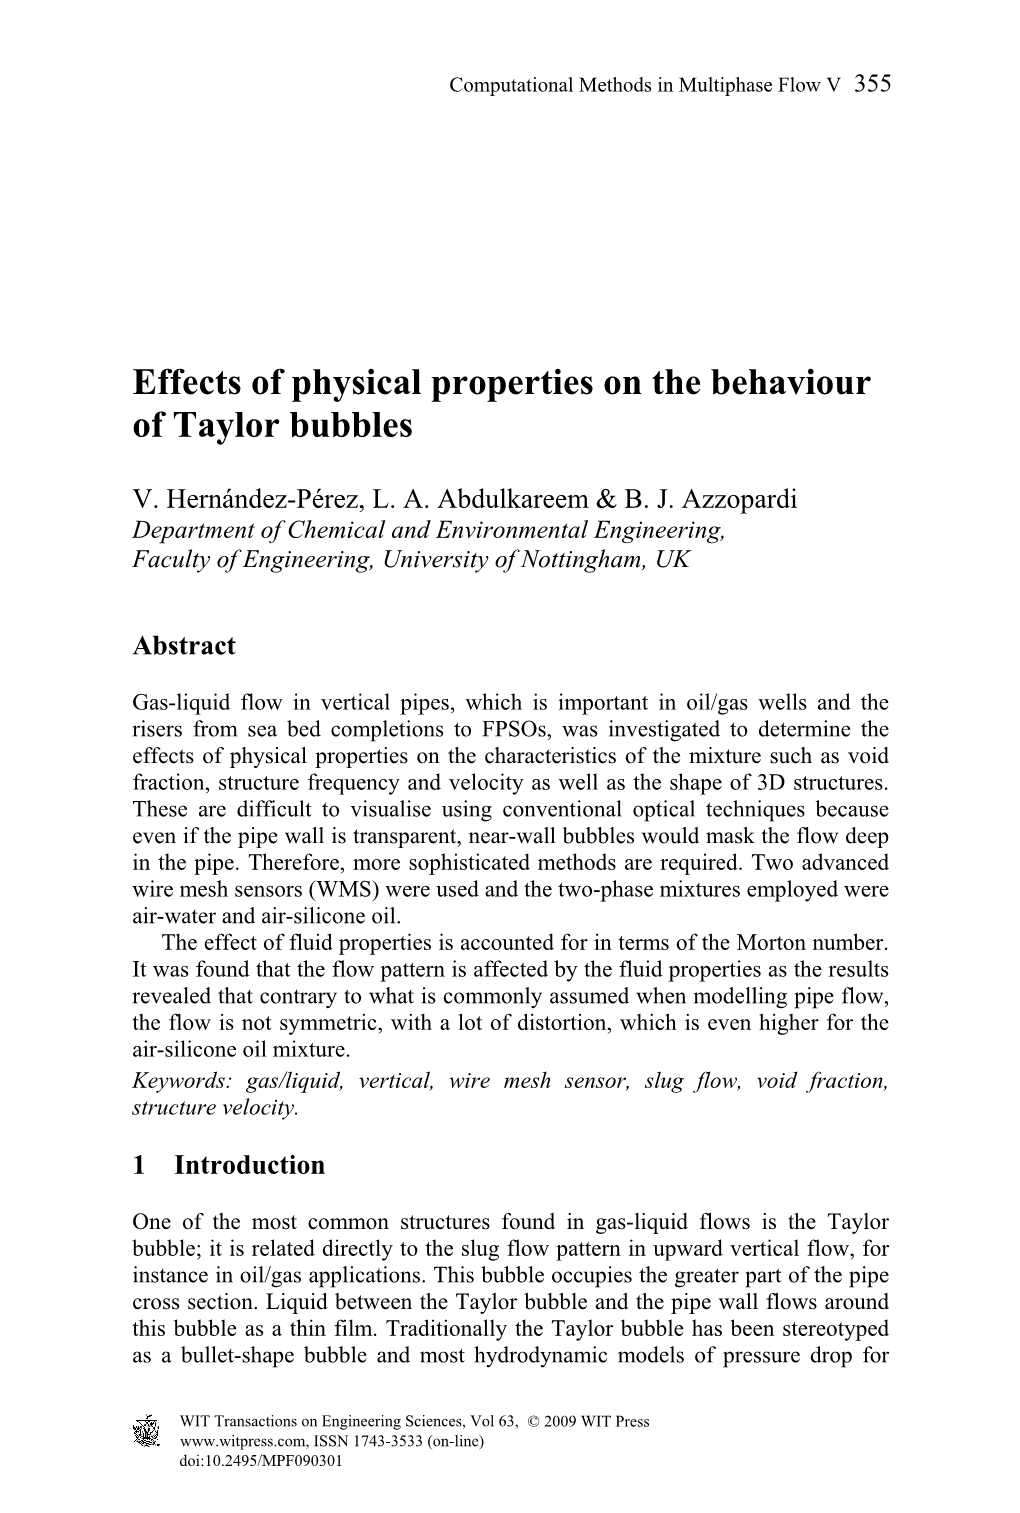 Effects of Physical Properties on the Behaviour of Taylor Bubbles